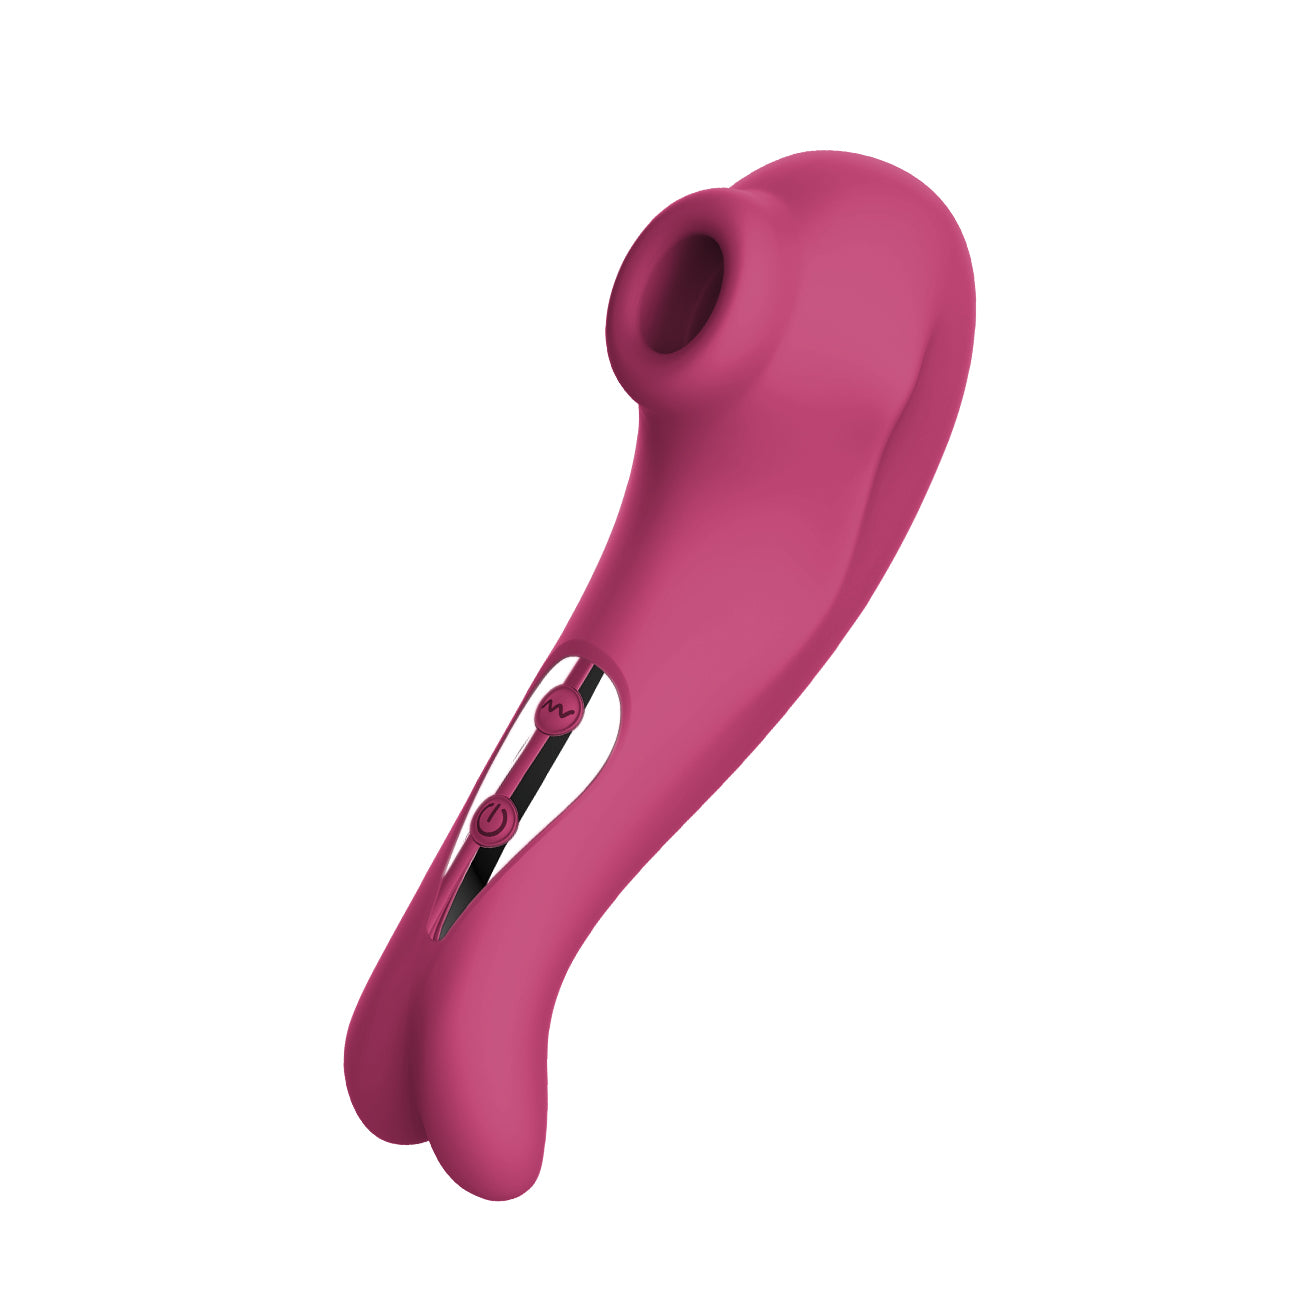 Tracy'd dog P. Cat Sucking Vibrator, color: rose, 10 suction modes, Different pulsation frequencies, 100% body-safe odorless silicon, easy to clean, Build With Pleasure Air technology